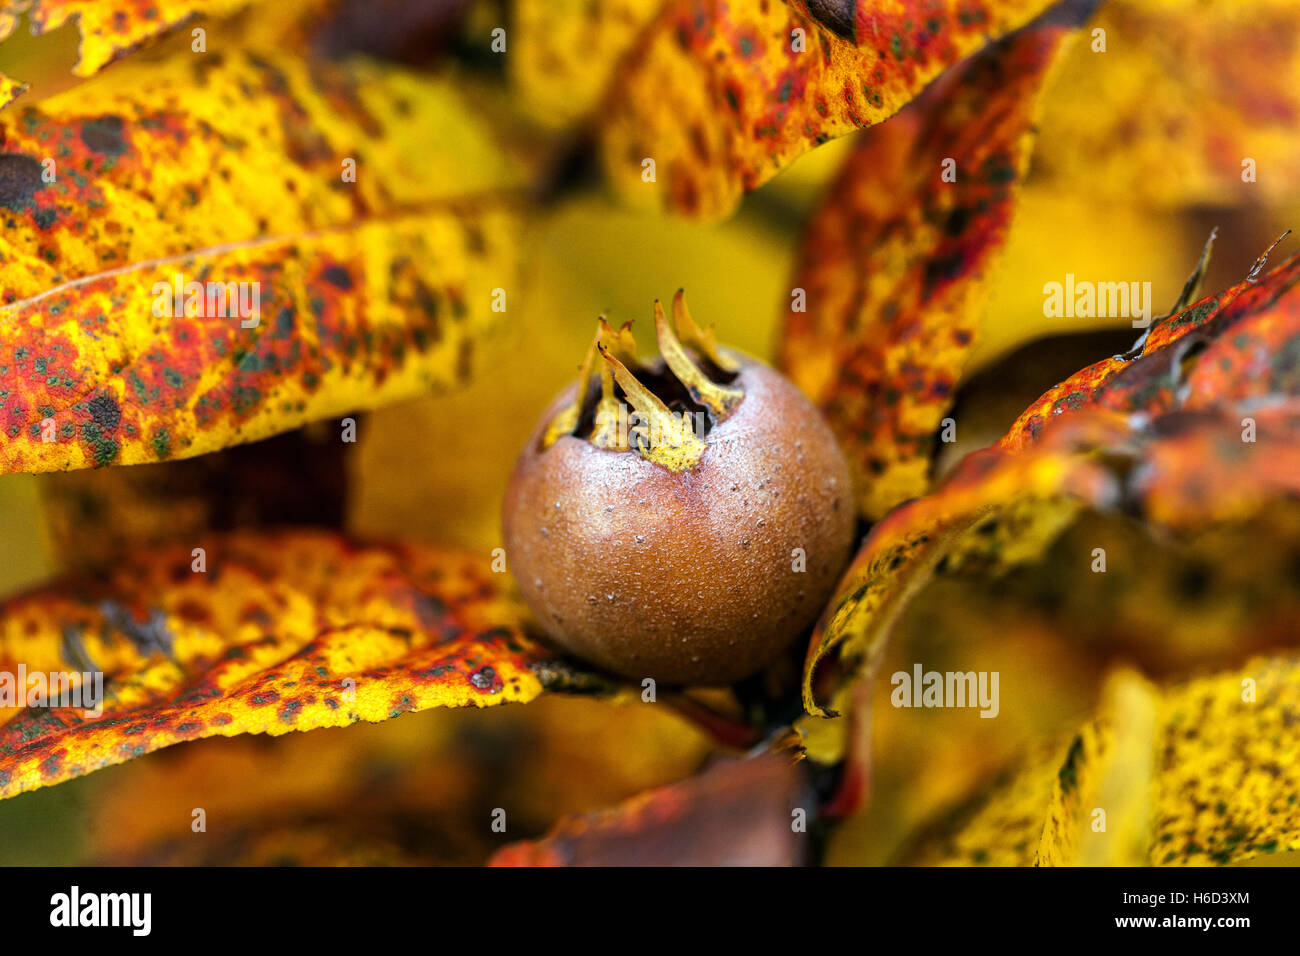 Medlar, Mespilus germanica autumn leaves ripening fruit on a common medlar tree branch autumnal colors Stock Photo